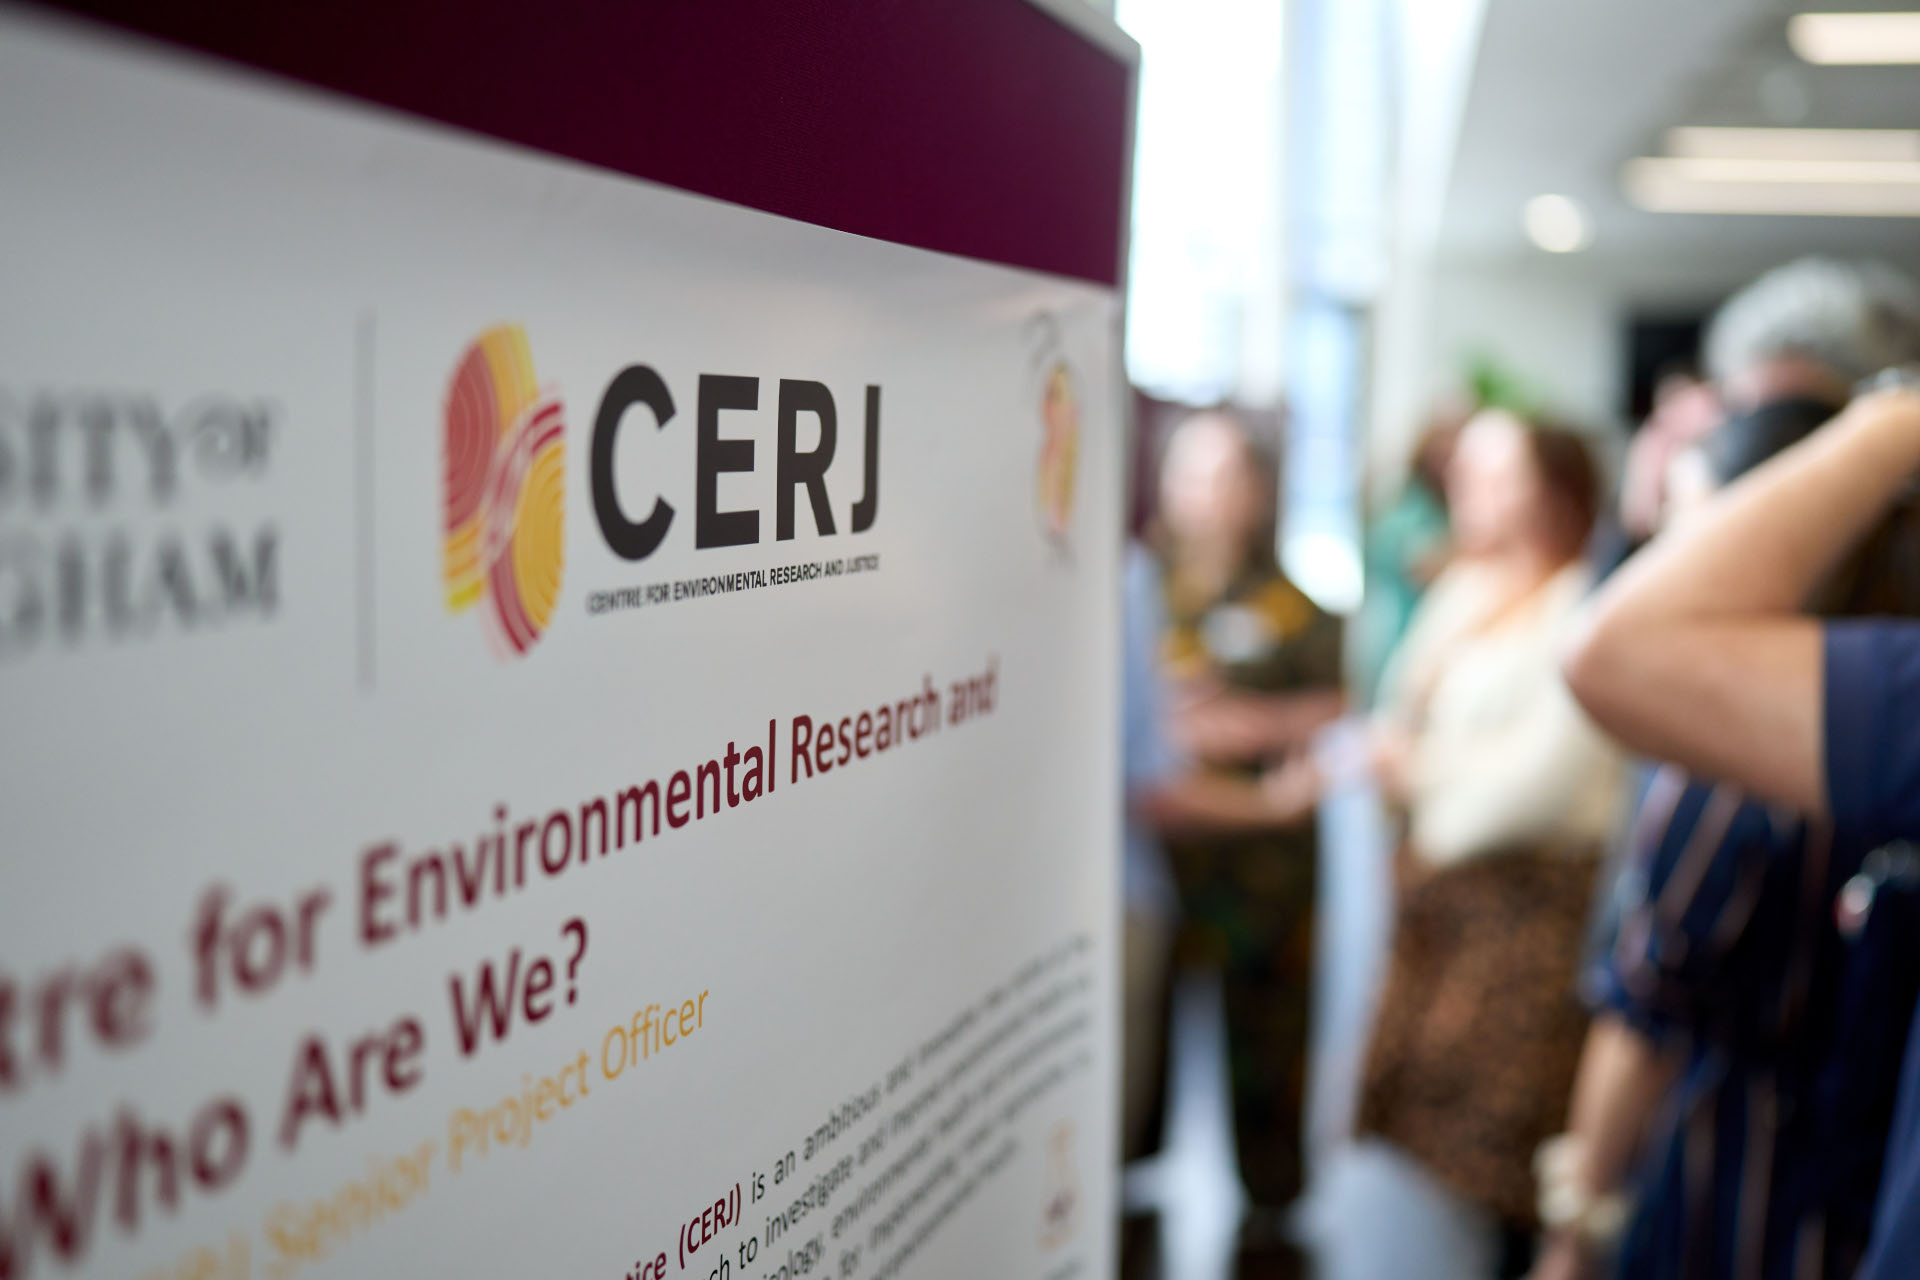 Picture of a poster displaying the CERJ logo